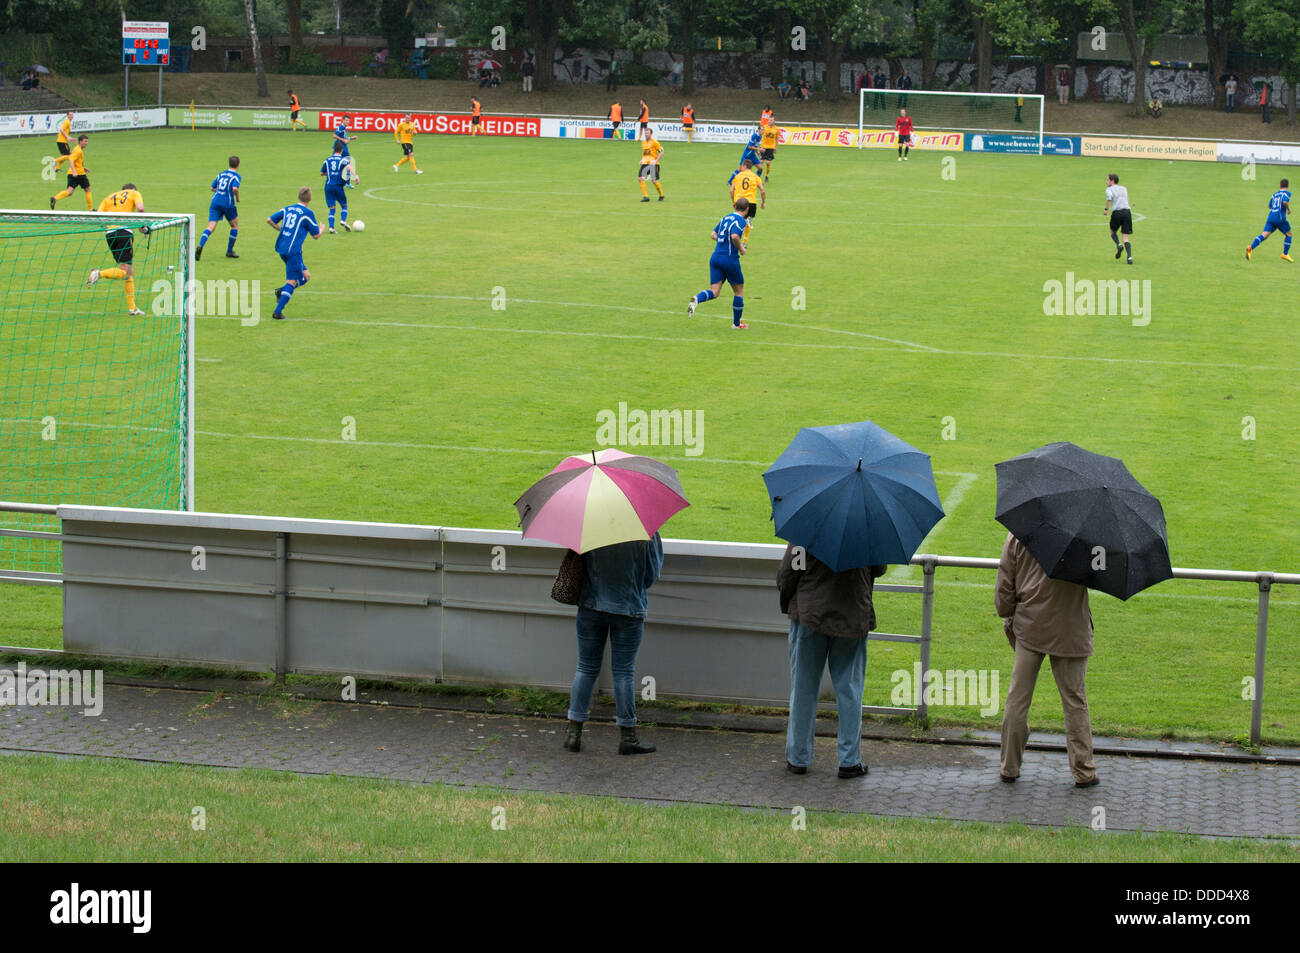 Fans of TuRU 1880 Dusseldorf standing in the rain watching a game against SV Honnepel-Niedermormter 18.08.13 (1-2) Stock Photo